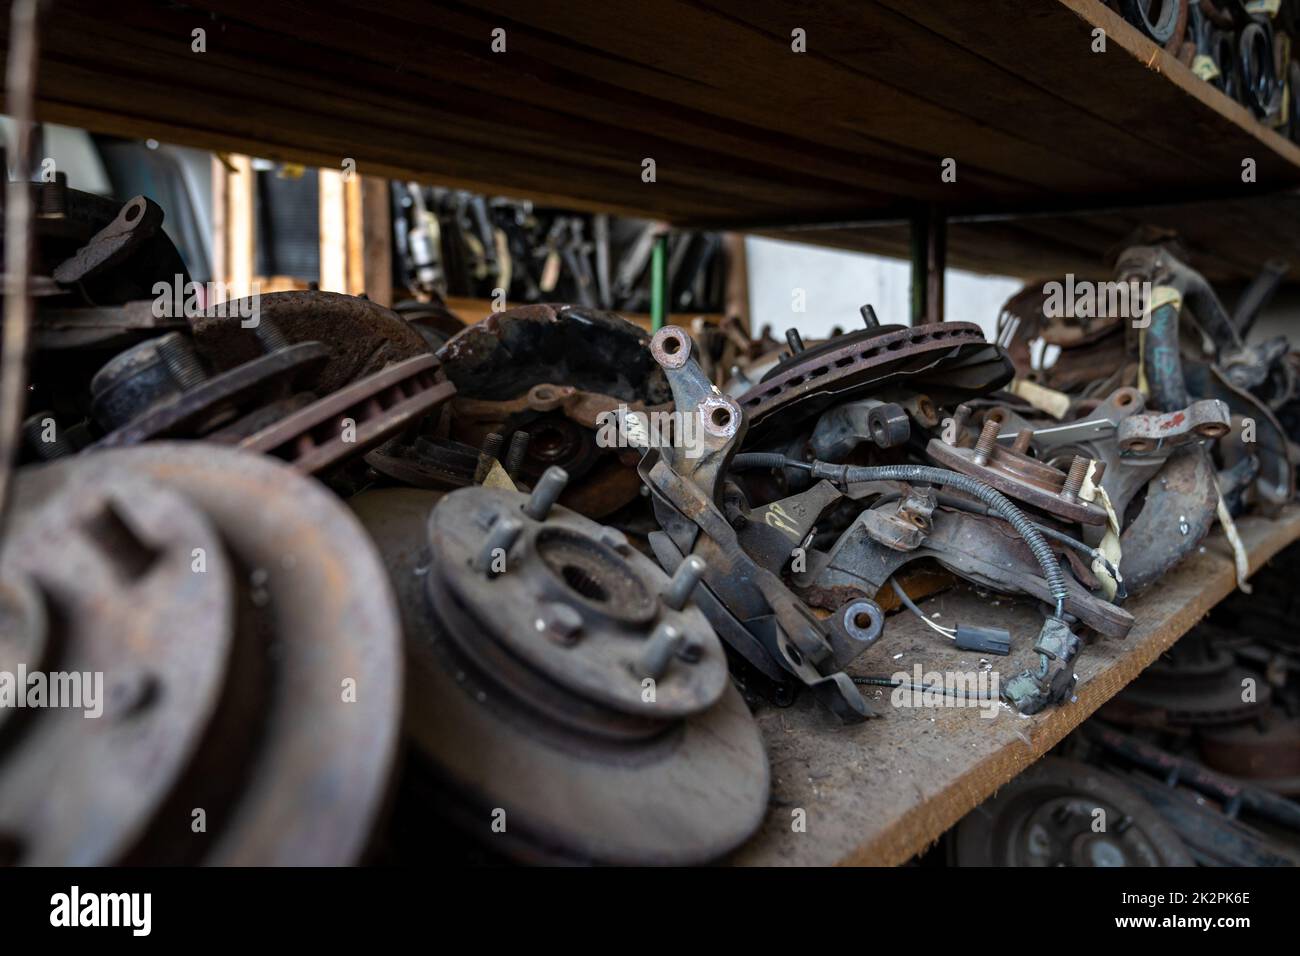 parts of dismantled cars at the car wreck Stock Photo